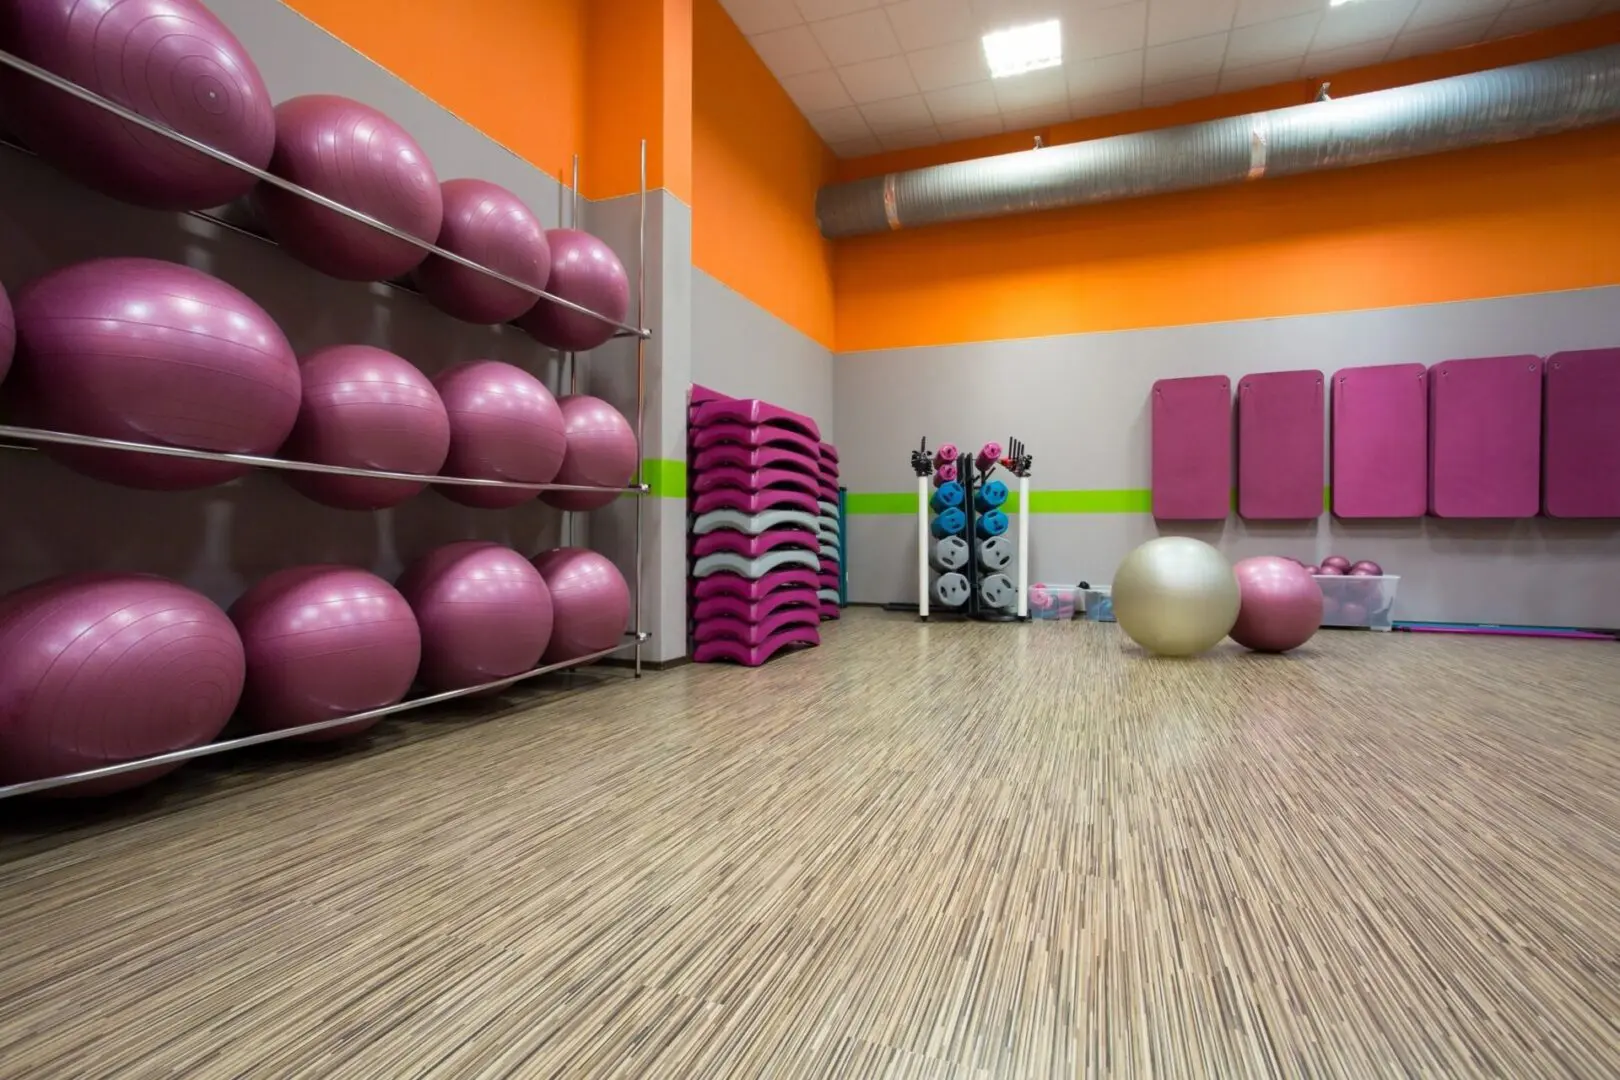 A gym with pink and purple balls on the floor.